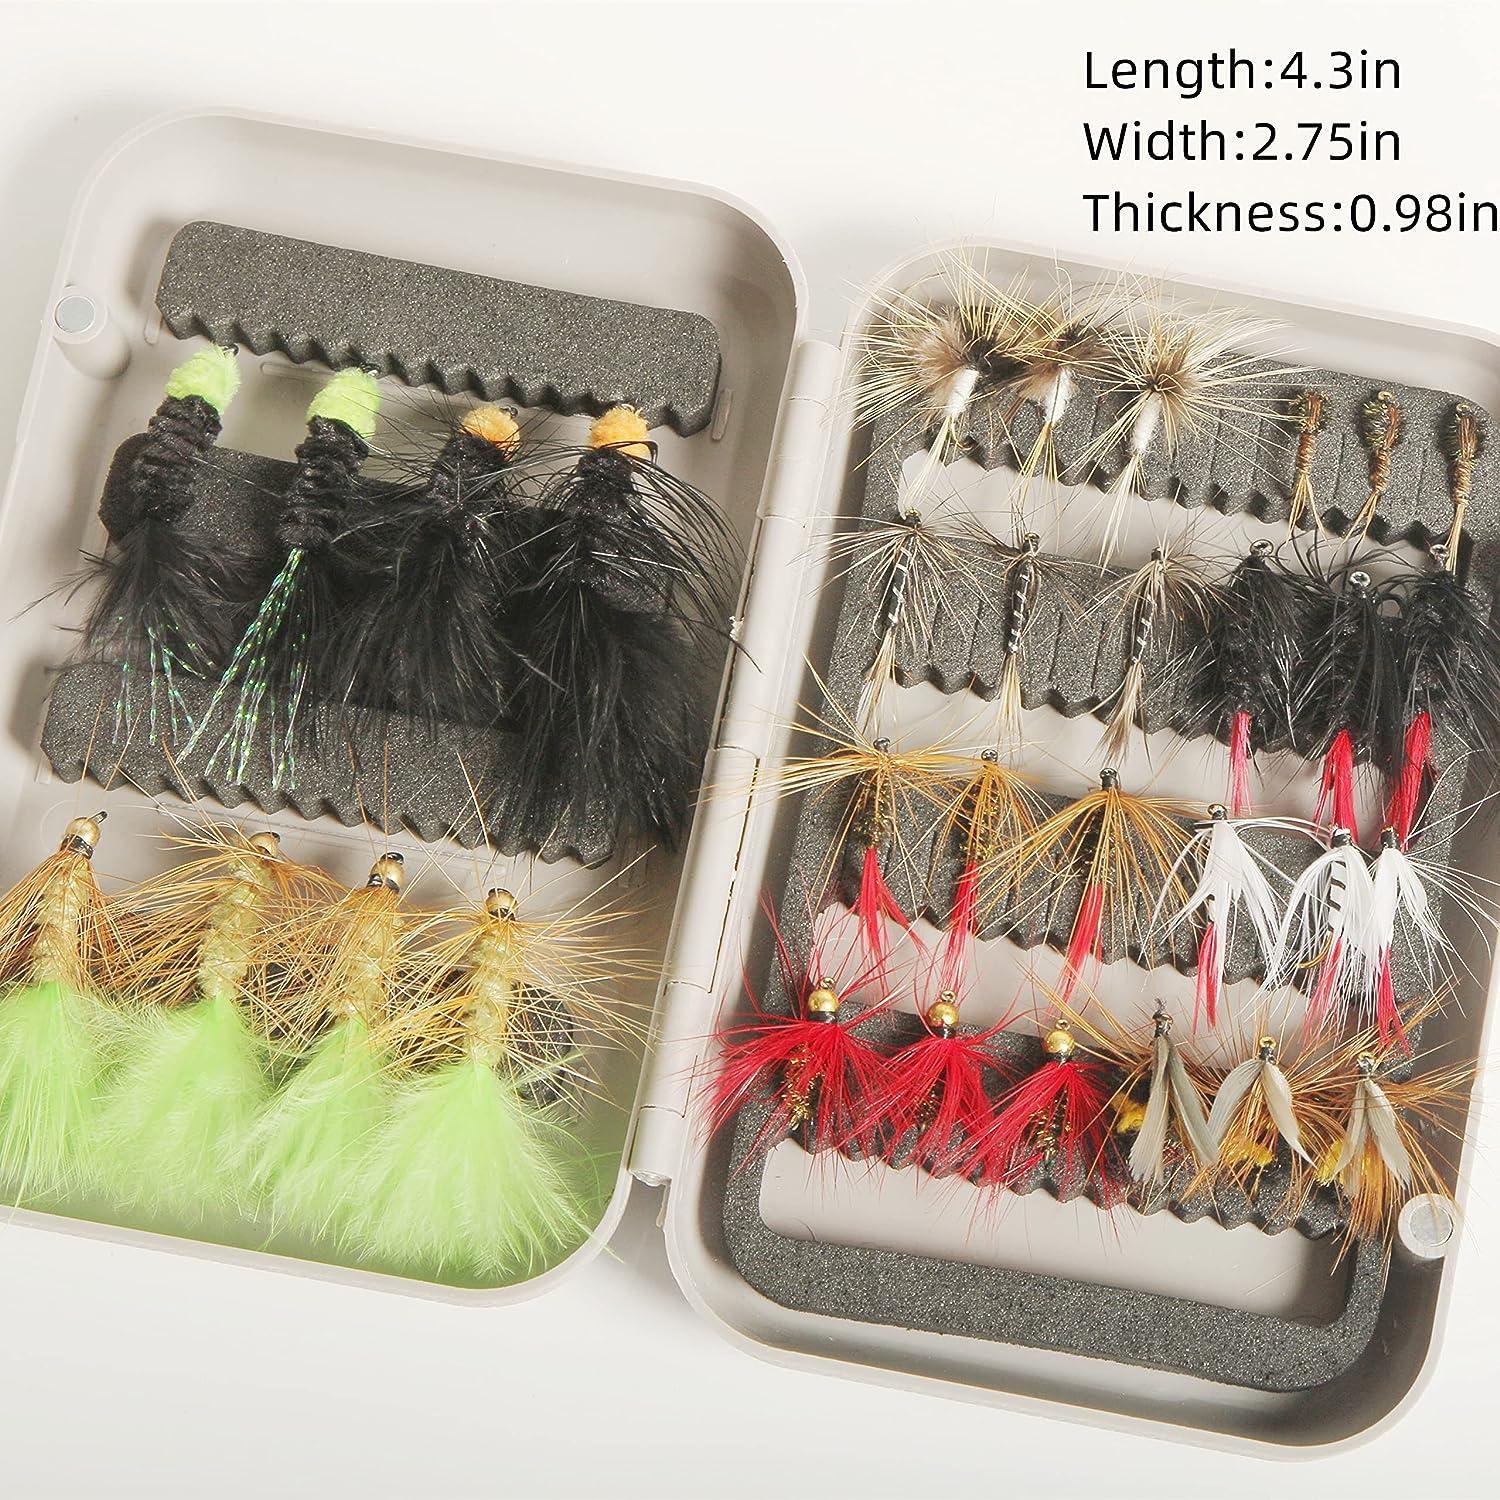 Ansnbo 36PCS Fly Fishing Flies Kit, Hand Tied Trout Bass Fly